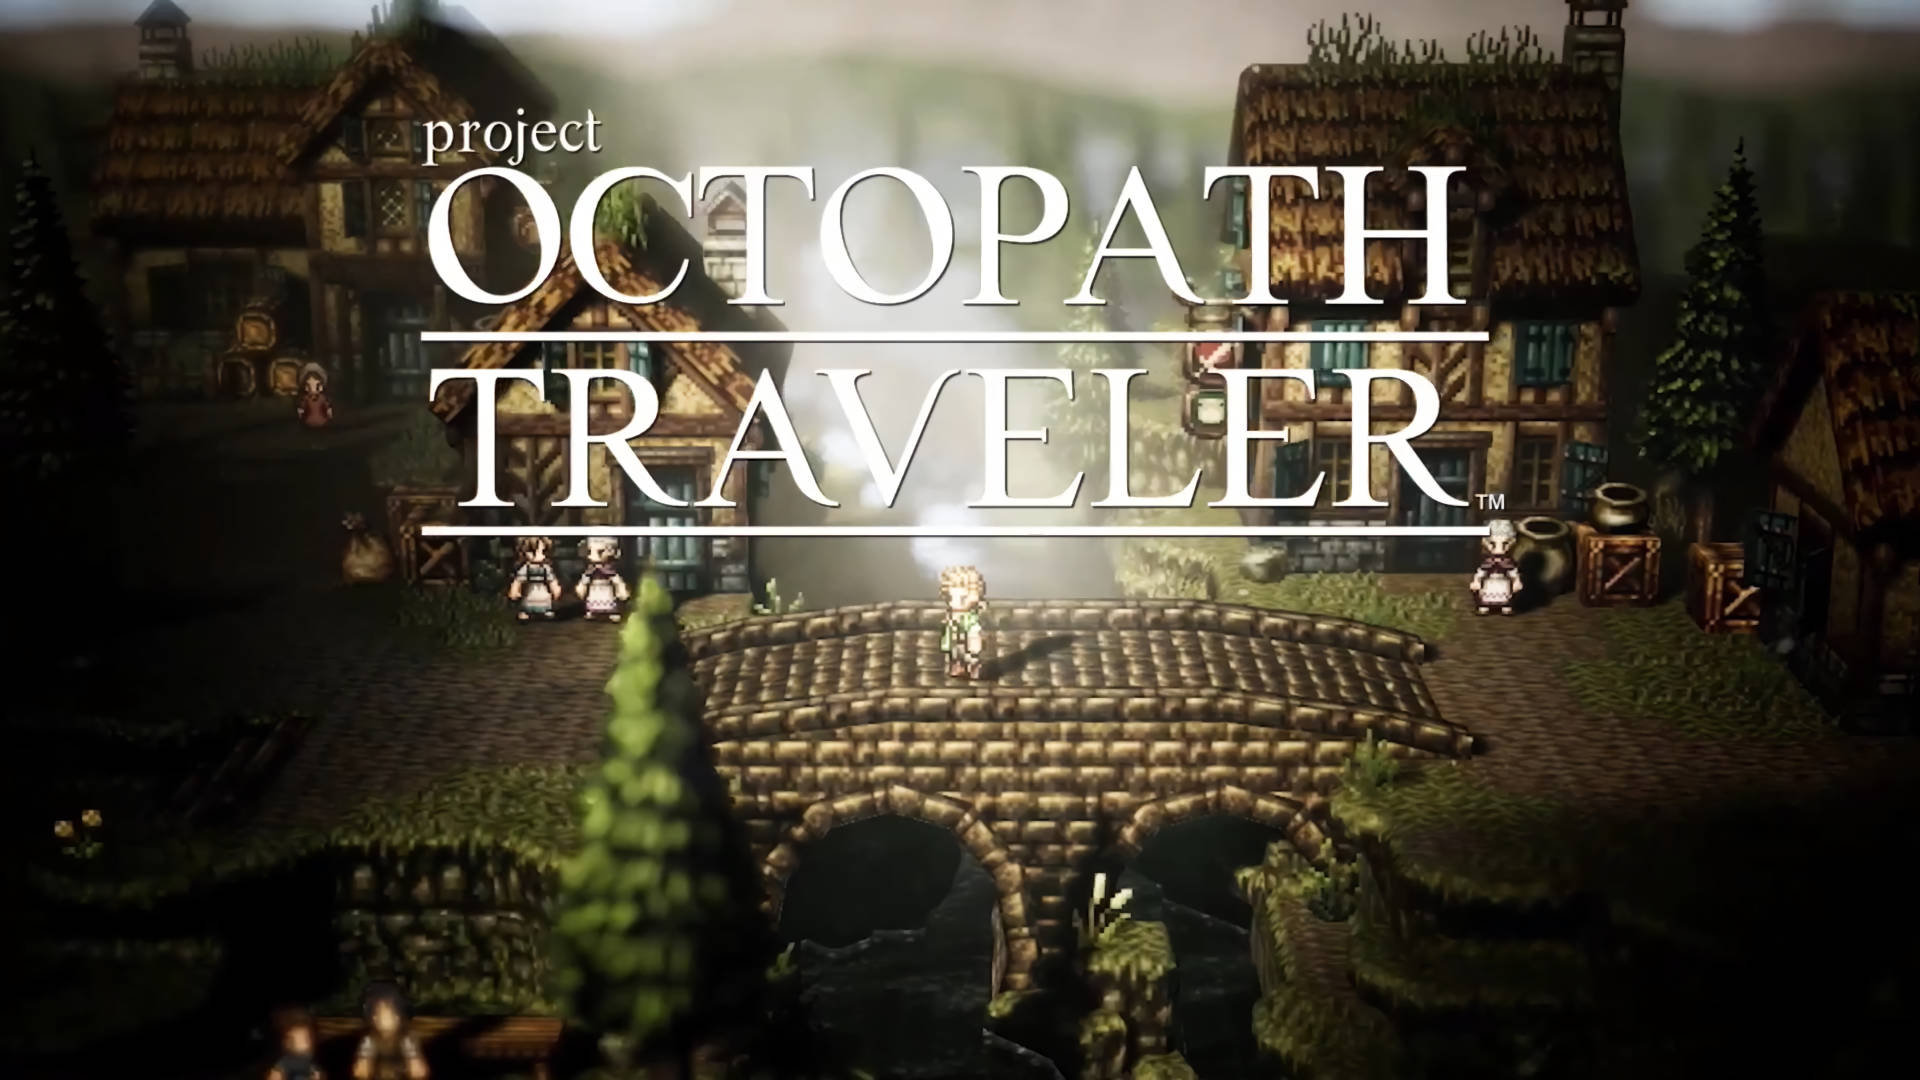 Octopath Traveler Game Poster Background